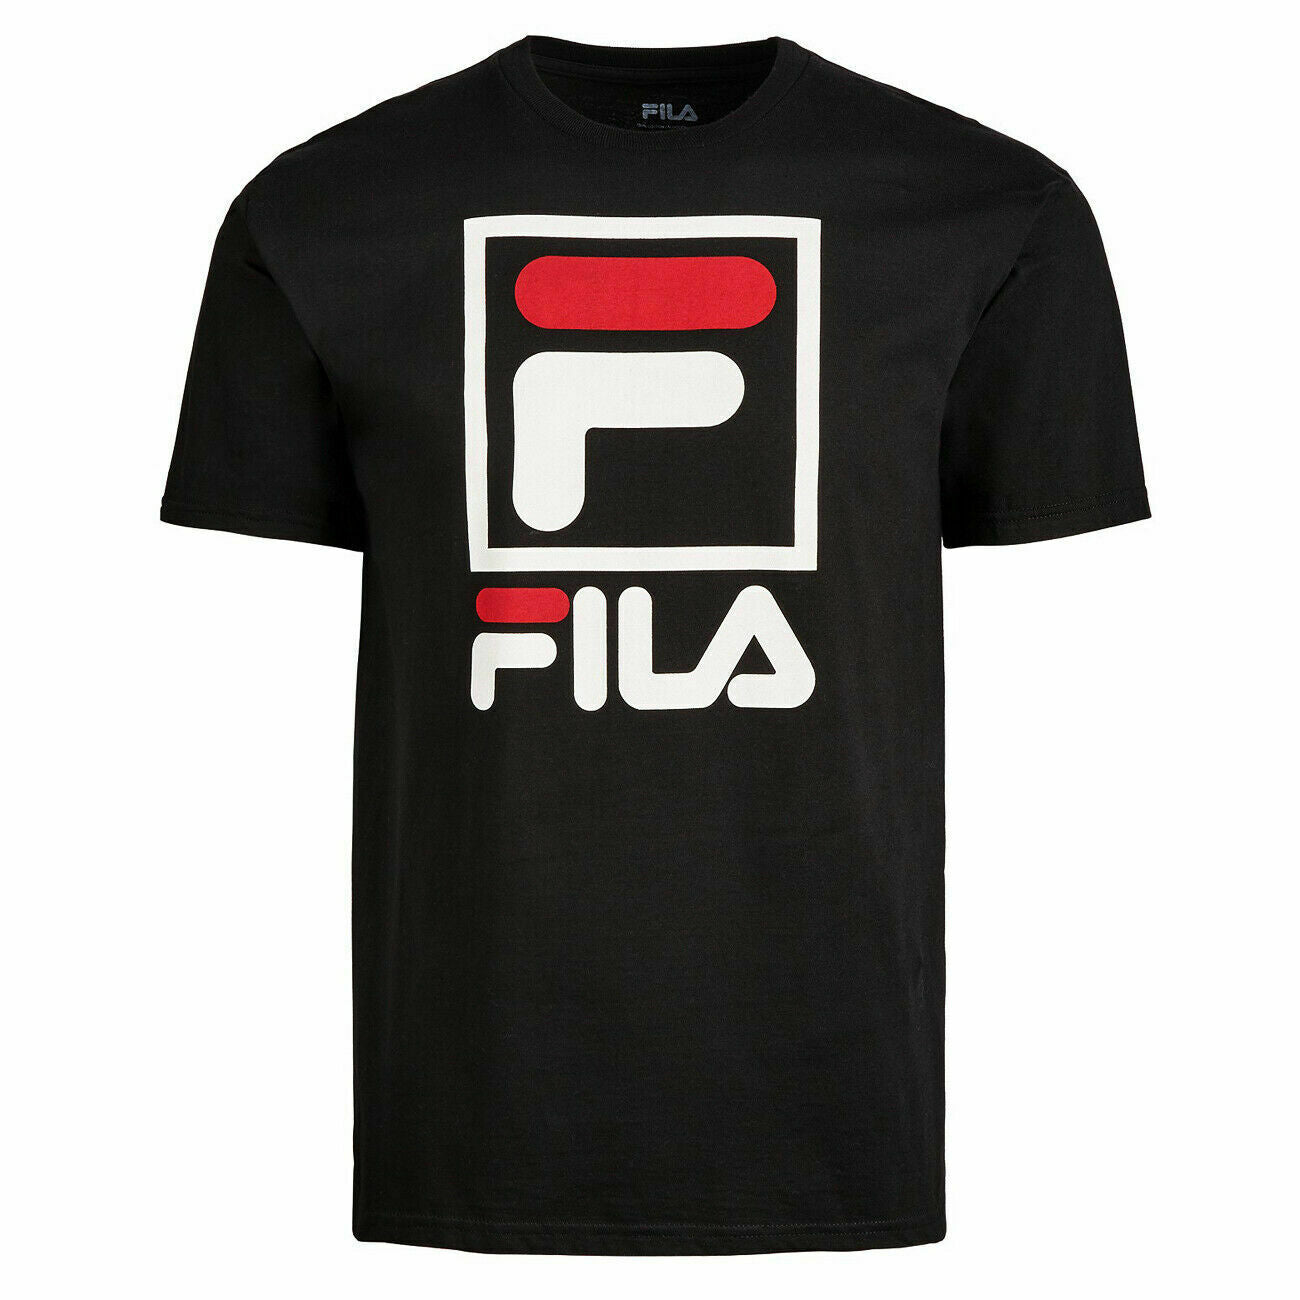 FILA Men's Stacked Logo T-shirt - Black with Red and White